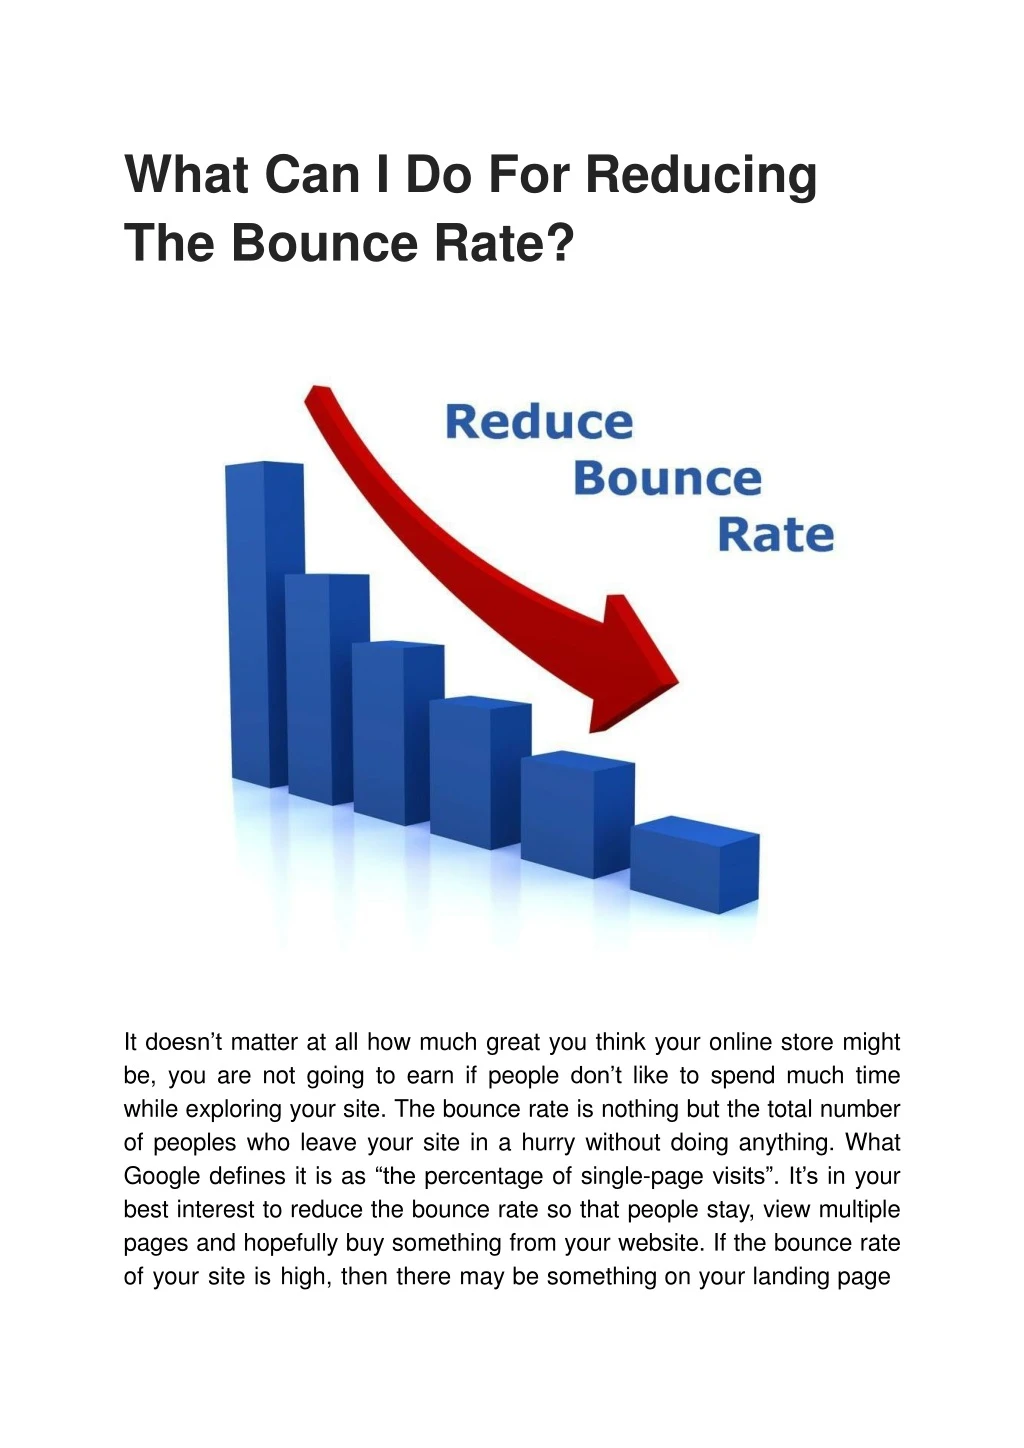 what can i do for reducing the bounce rate